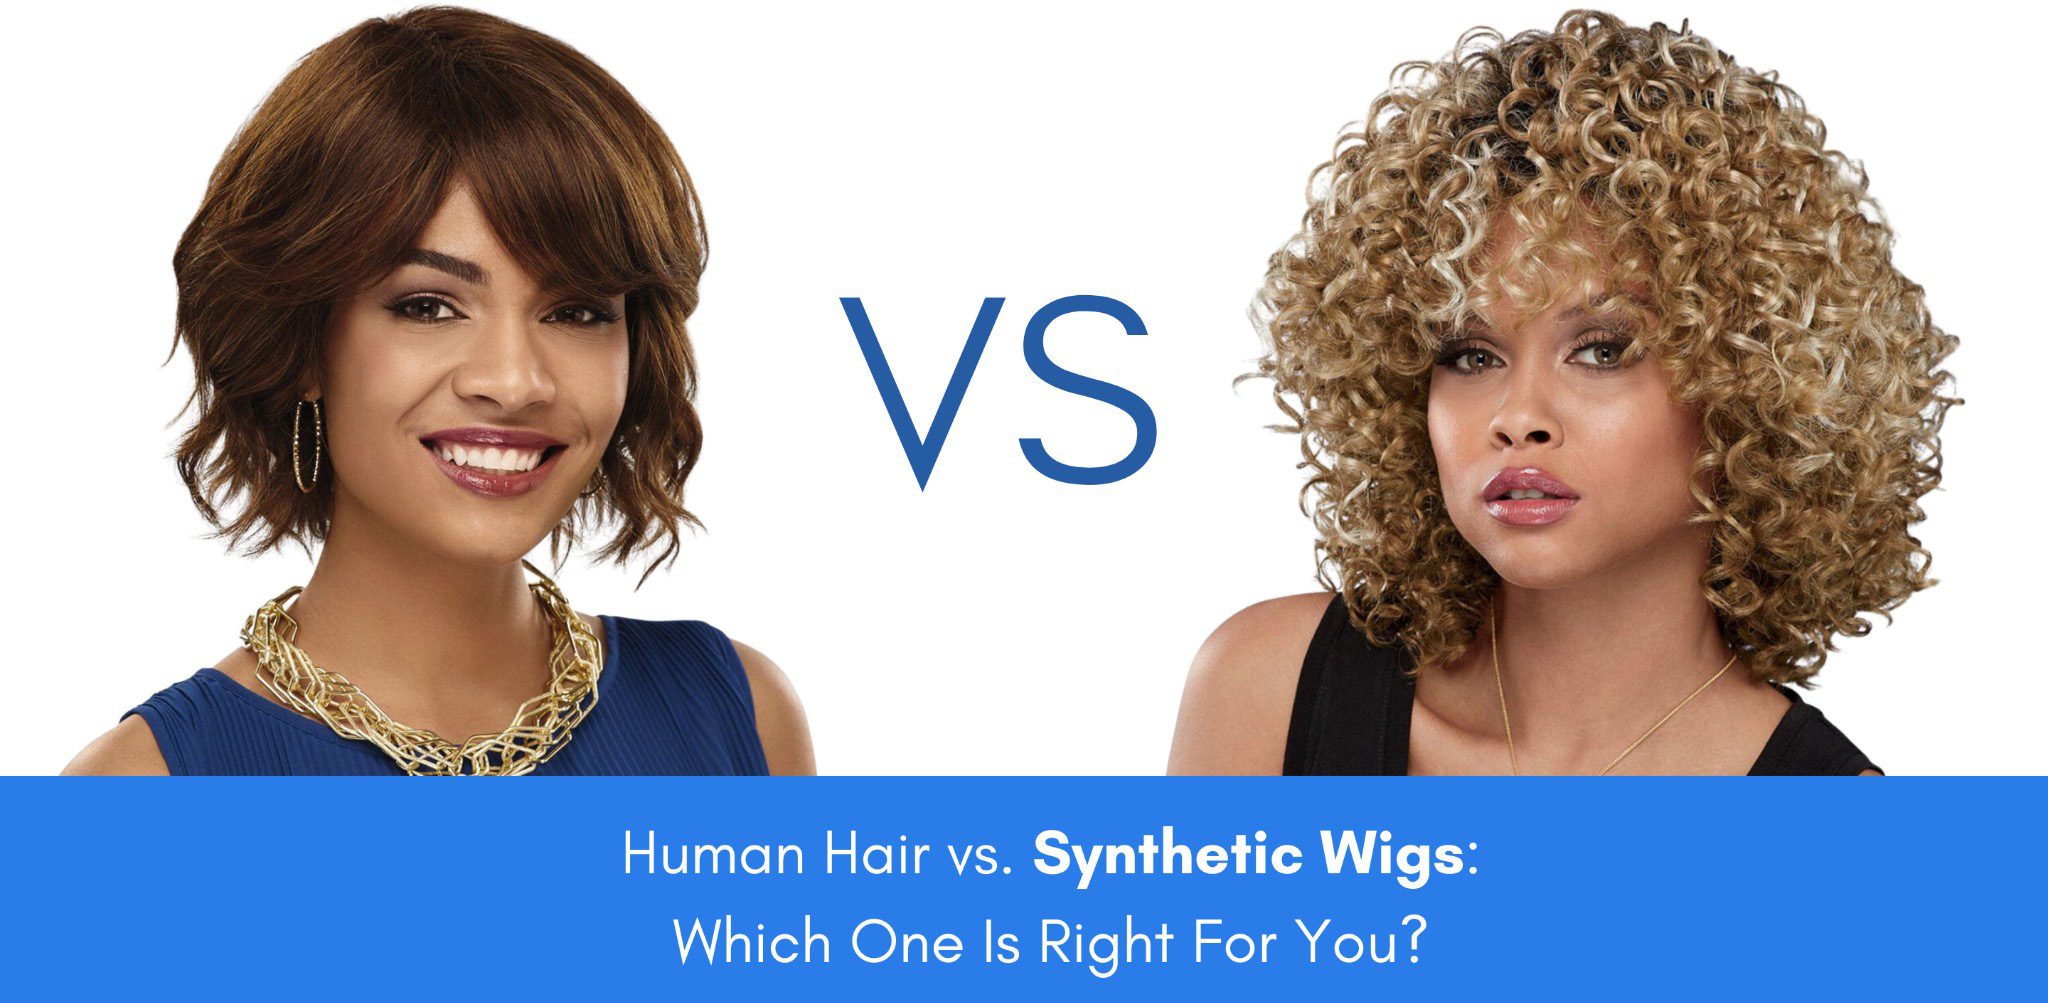 Human Hair vs. Synthetic Wigs: Which One Is Right For You?